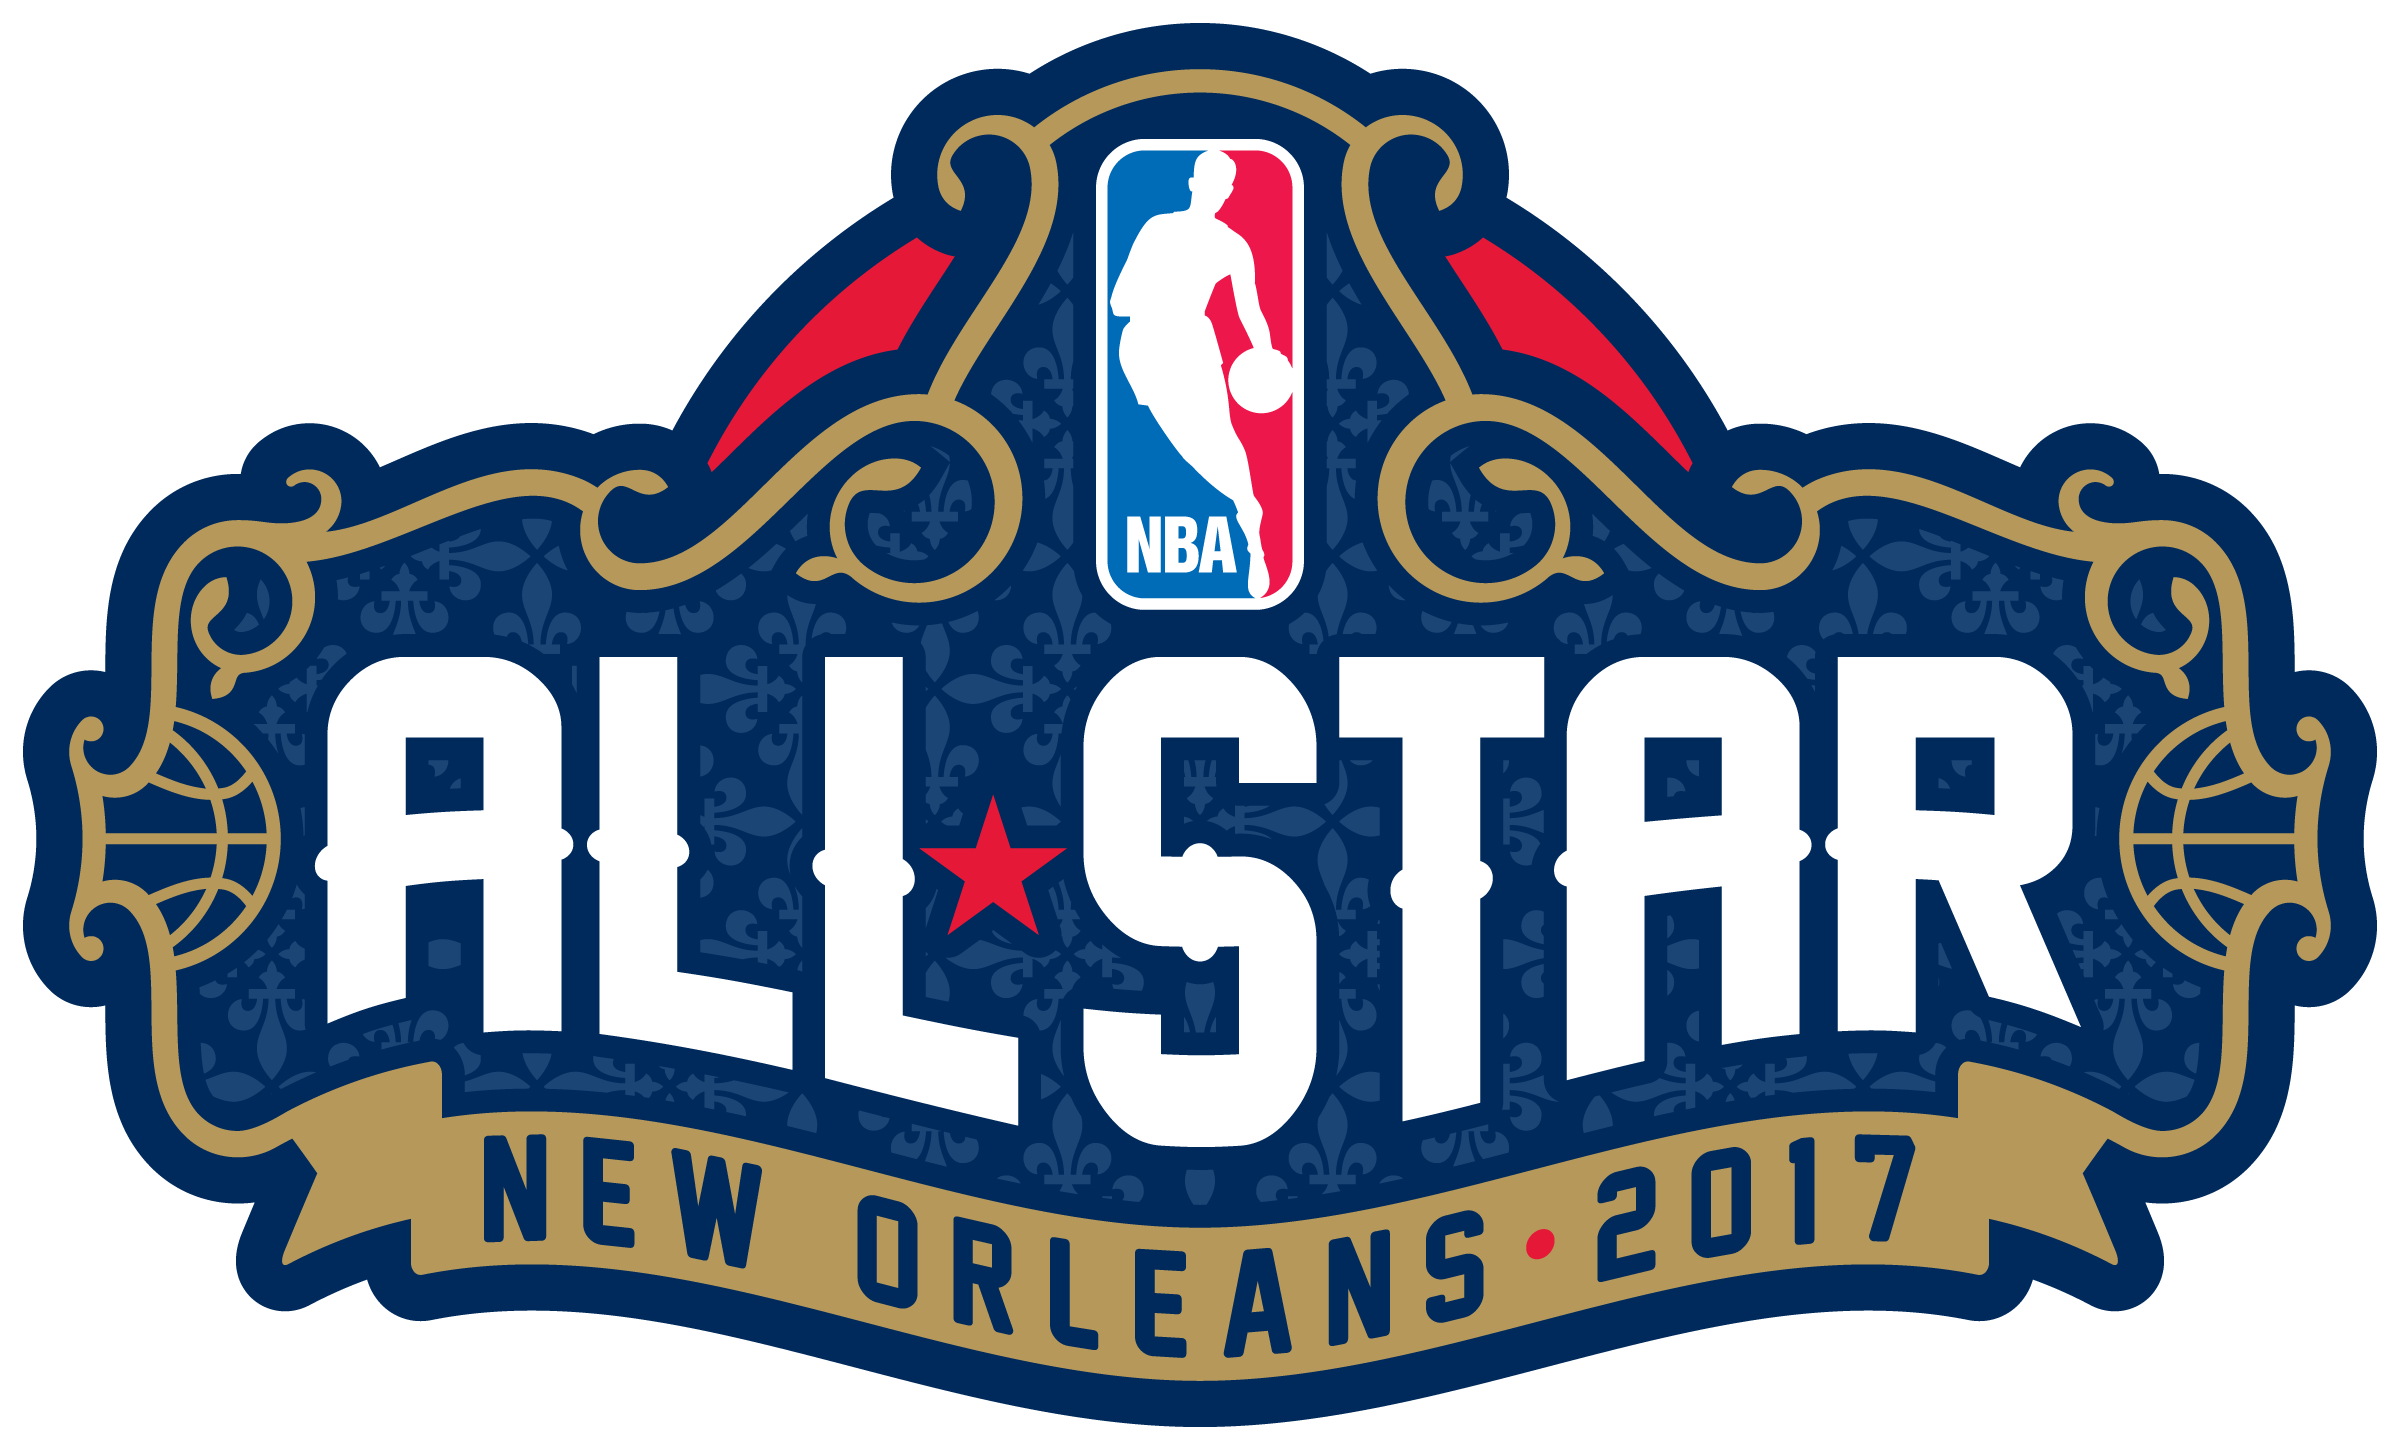 Help Your Pelicans Represent On Their Home Court For - All Star New Orleans 2017 (2400x1450)